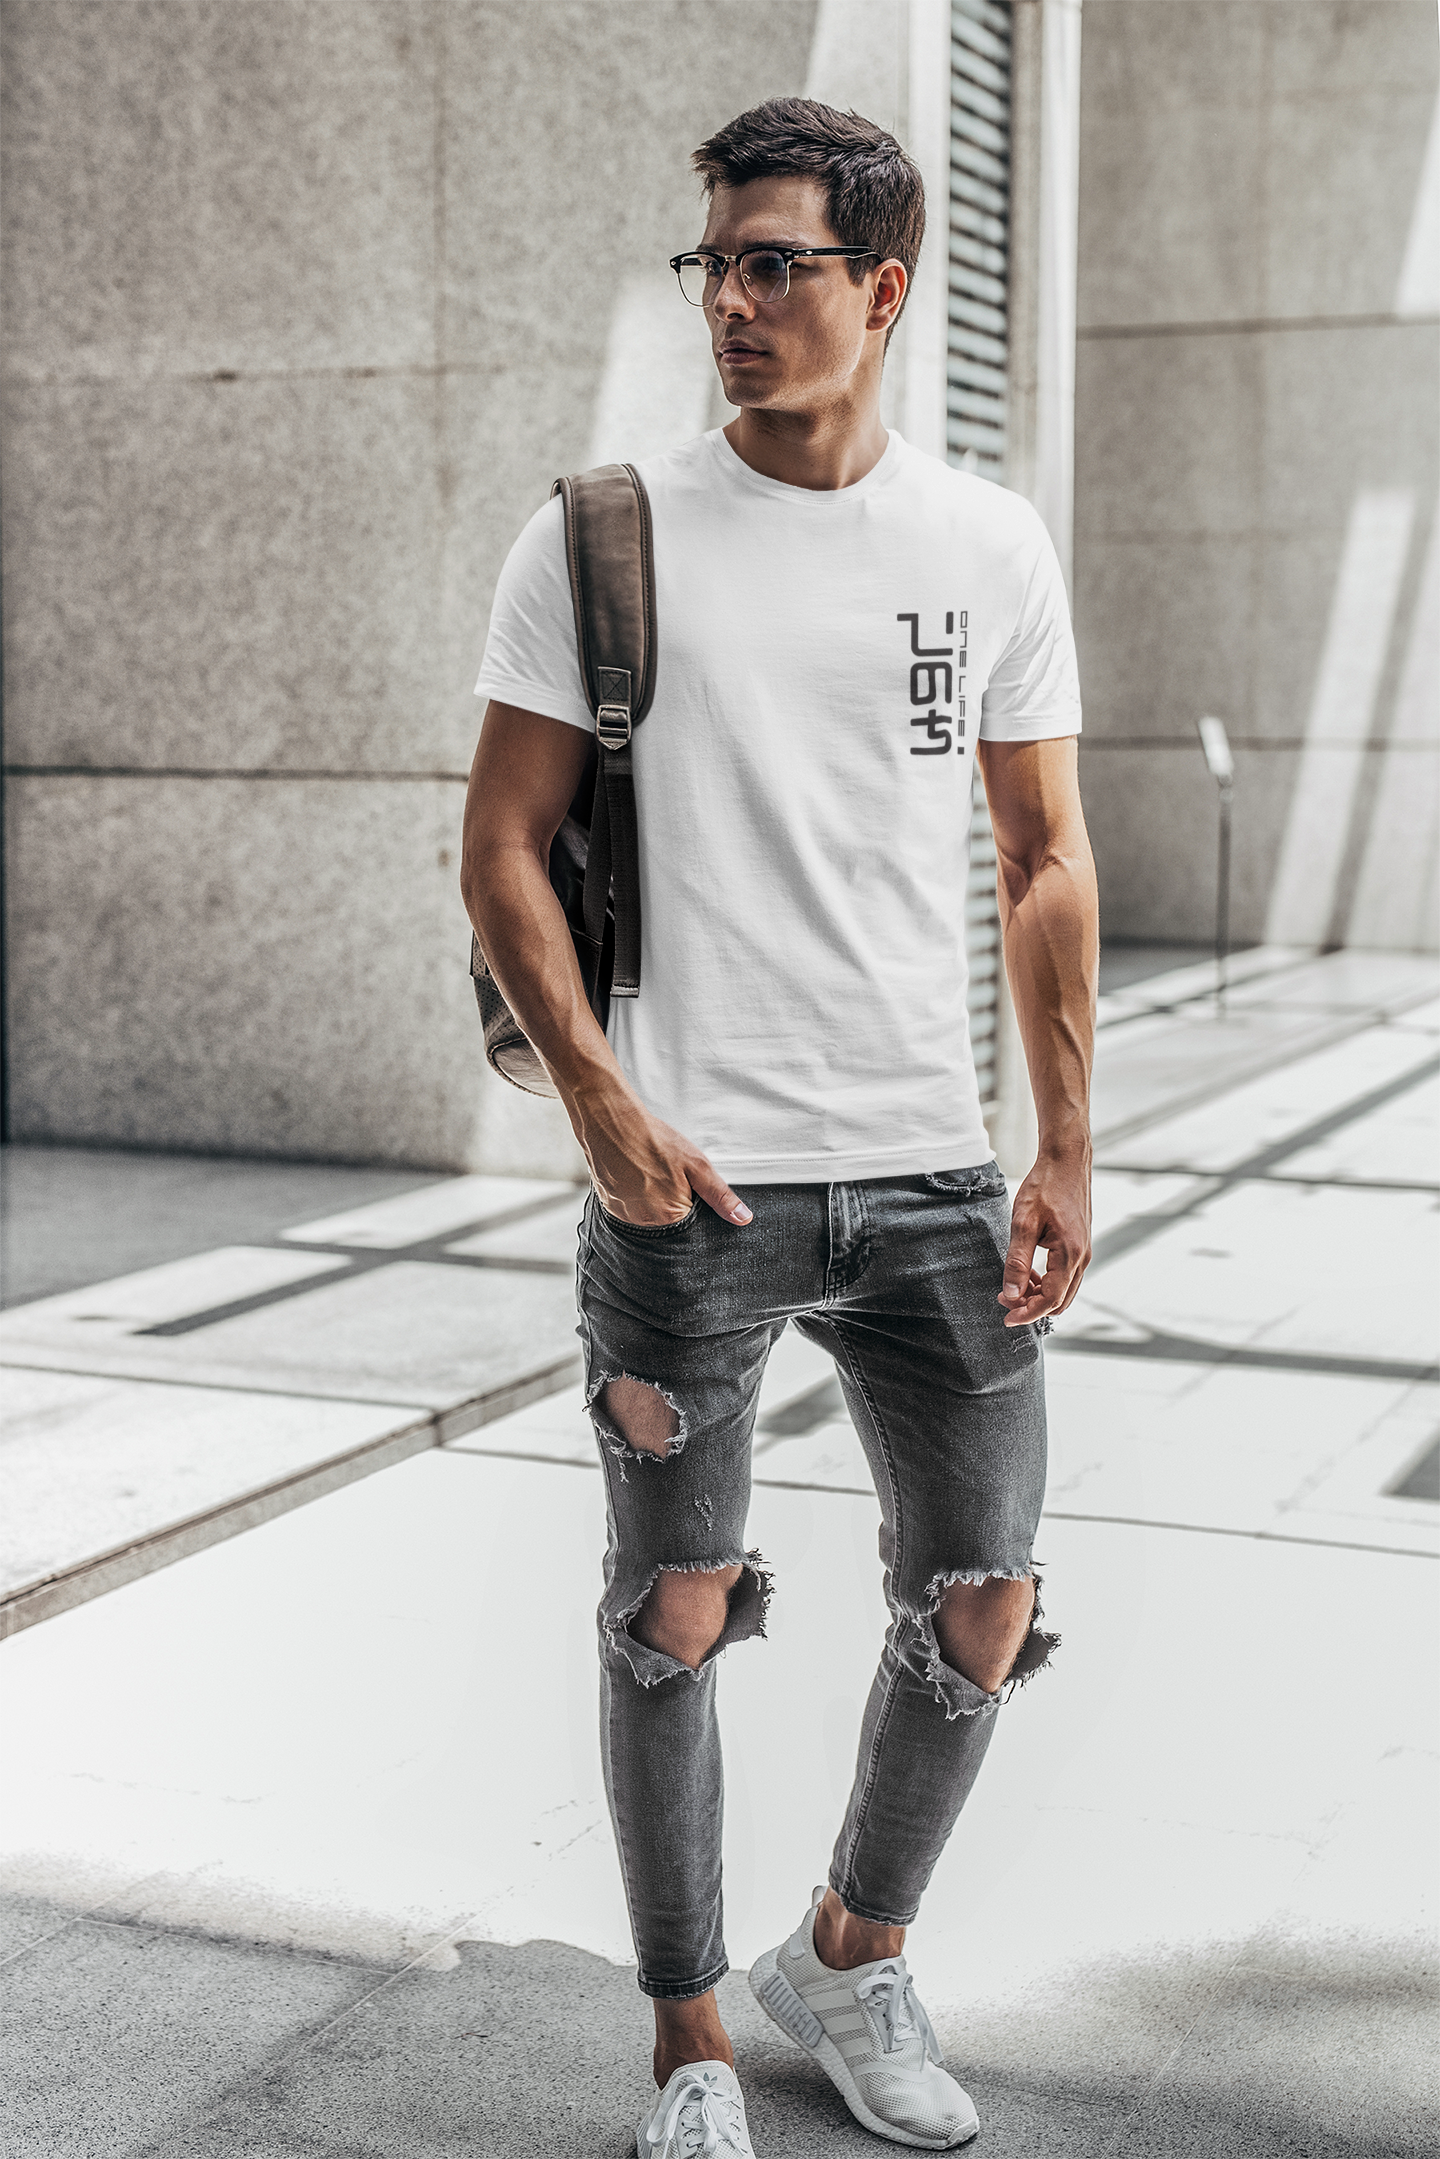 One-life t-shirt mockup of a man with glasses carrying a backpack on his shoulder